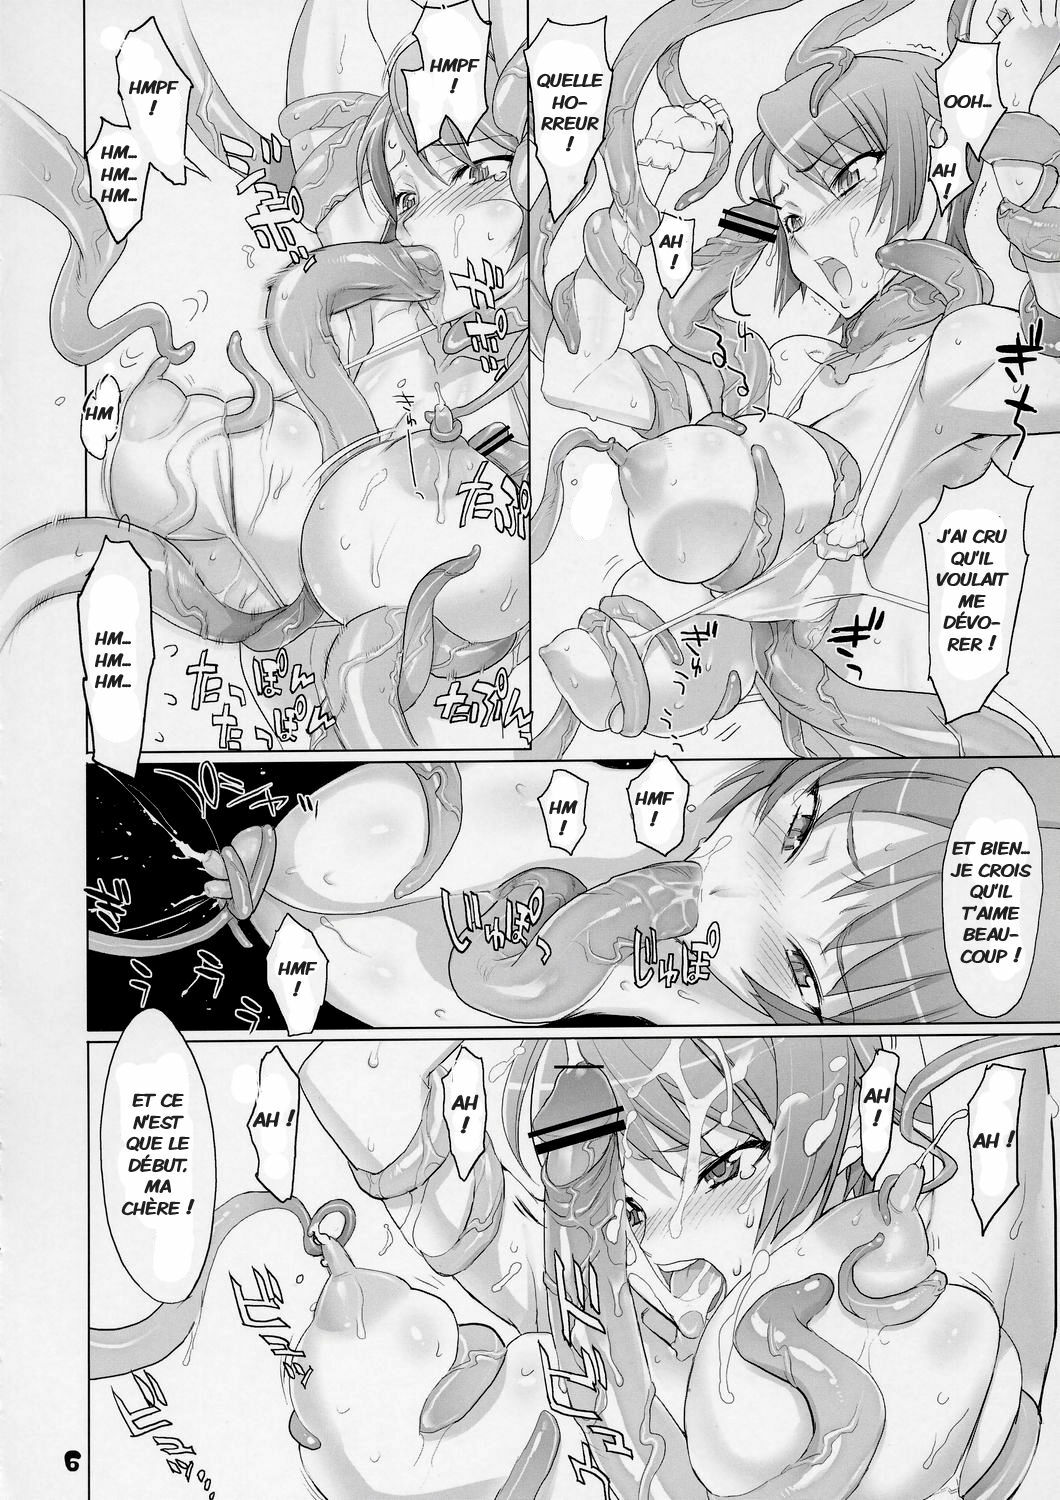 Countdown Party [French] [Rewrite] [Jiaker] page 5 full